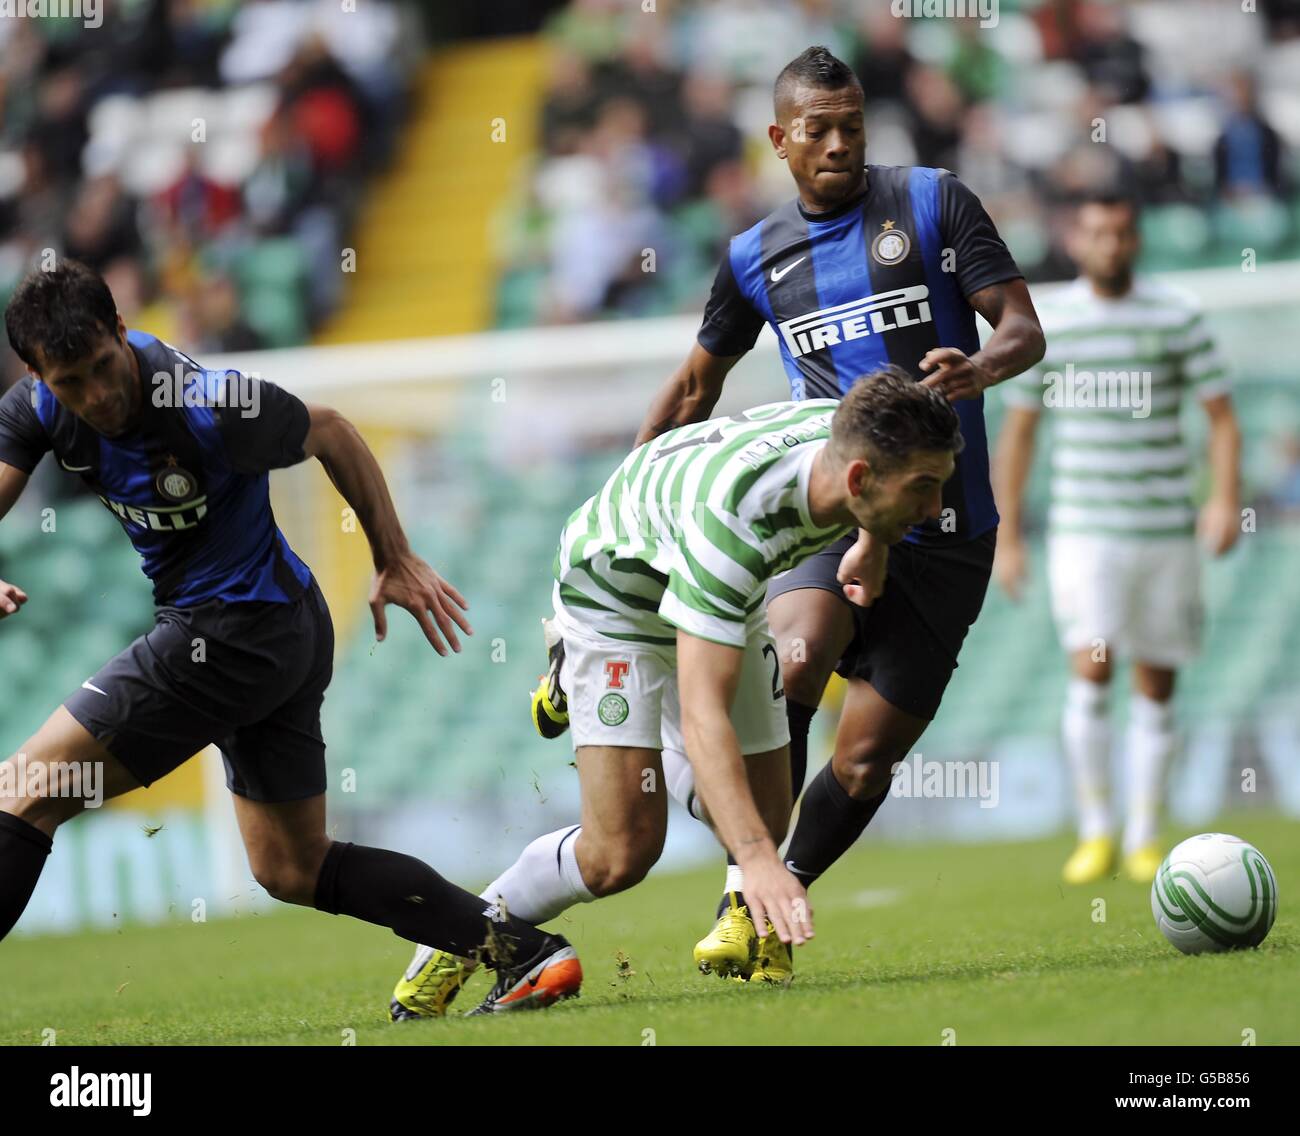 Celtic's Adam Mathew battles with Inter Milan's Fredy Guarin and Matias Silvestre during the Pre-Season Friendly at Celtic Park, Glasgow. PRESS ASSOCIATION Photo. Picture date: Saturday July 28, 2012. See PA story SOCCER Celtic. Photo credit should read: Craig Halkett/PA Wire Stock Photo